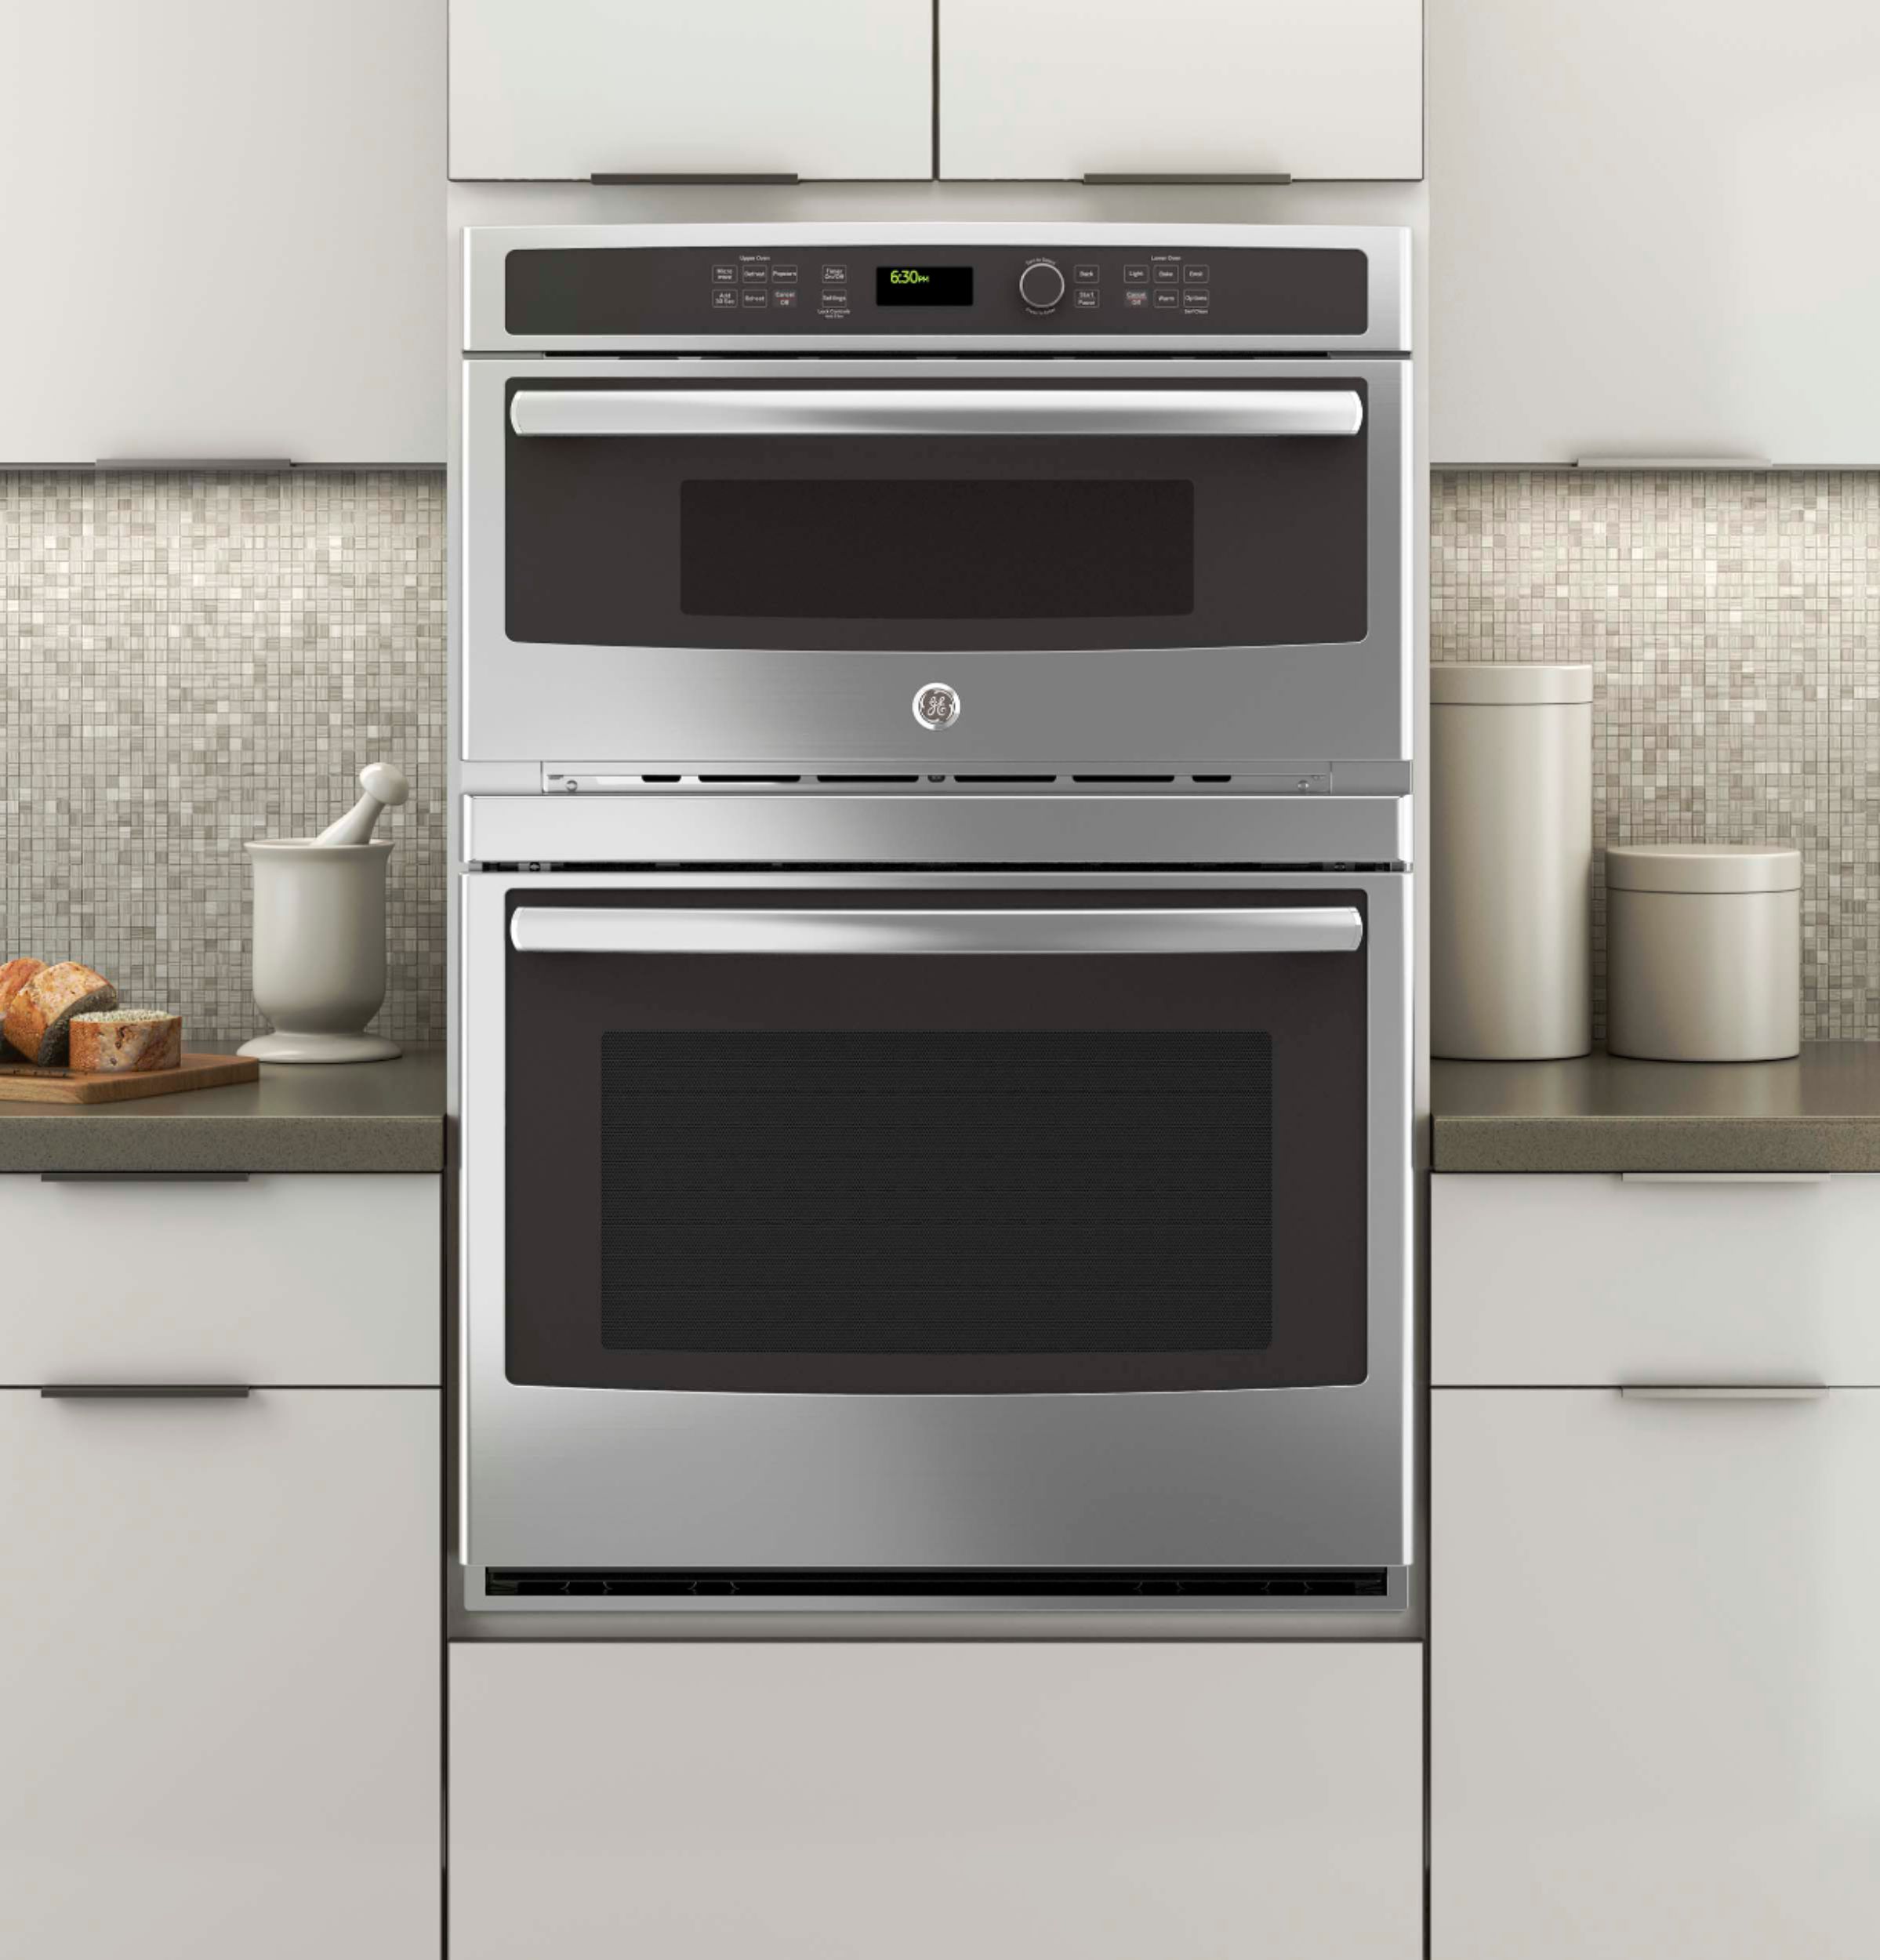 Left View: GE Profile - Advantium 30" Built-In Single Electric Convection Over-the-Range Oven with Microwave - Stainless steel